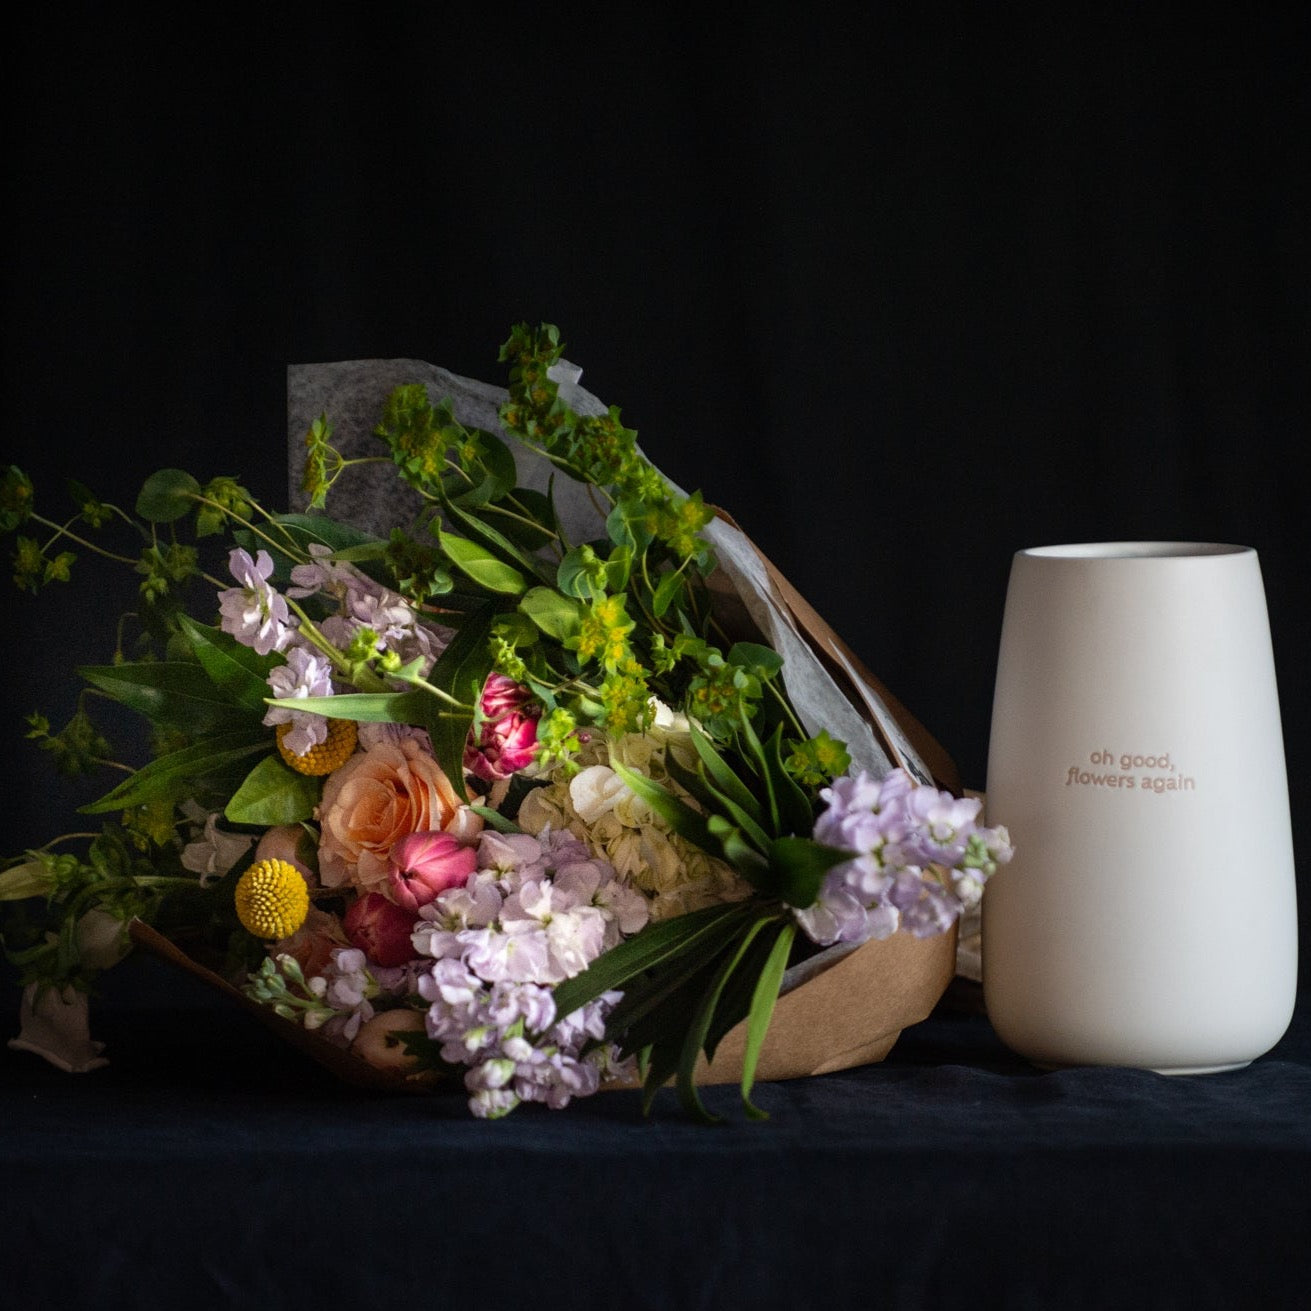 A wrap of flowers and vase that says "o good, flowers again"